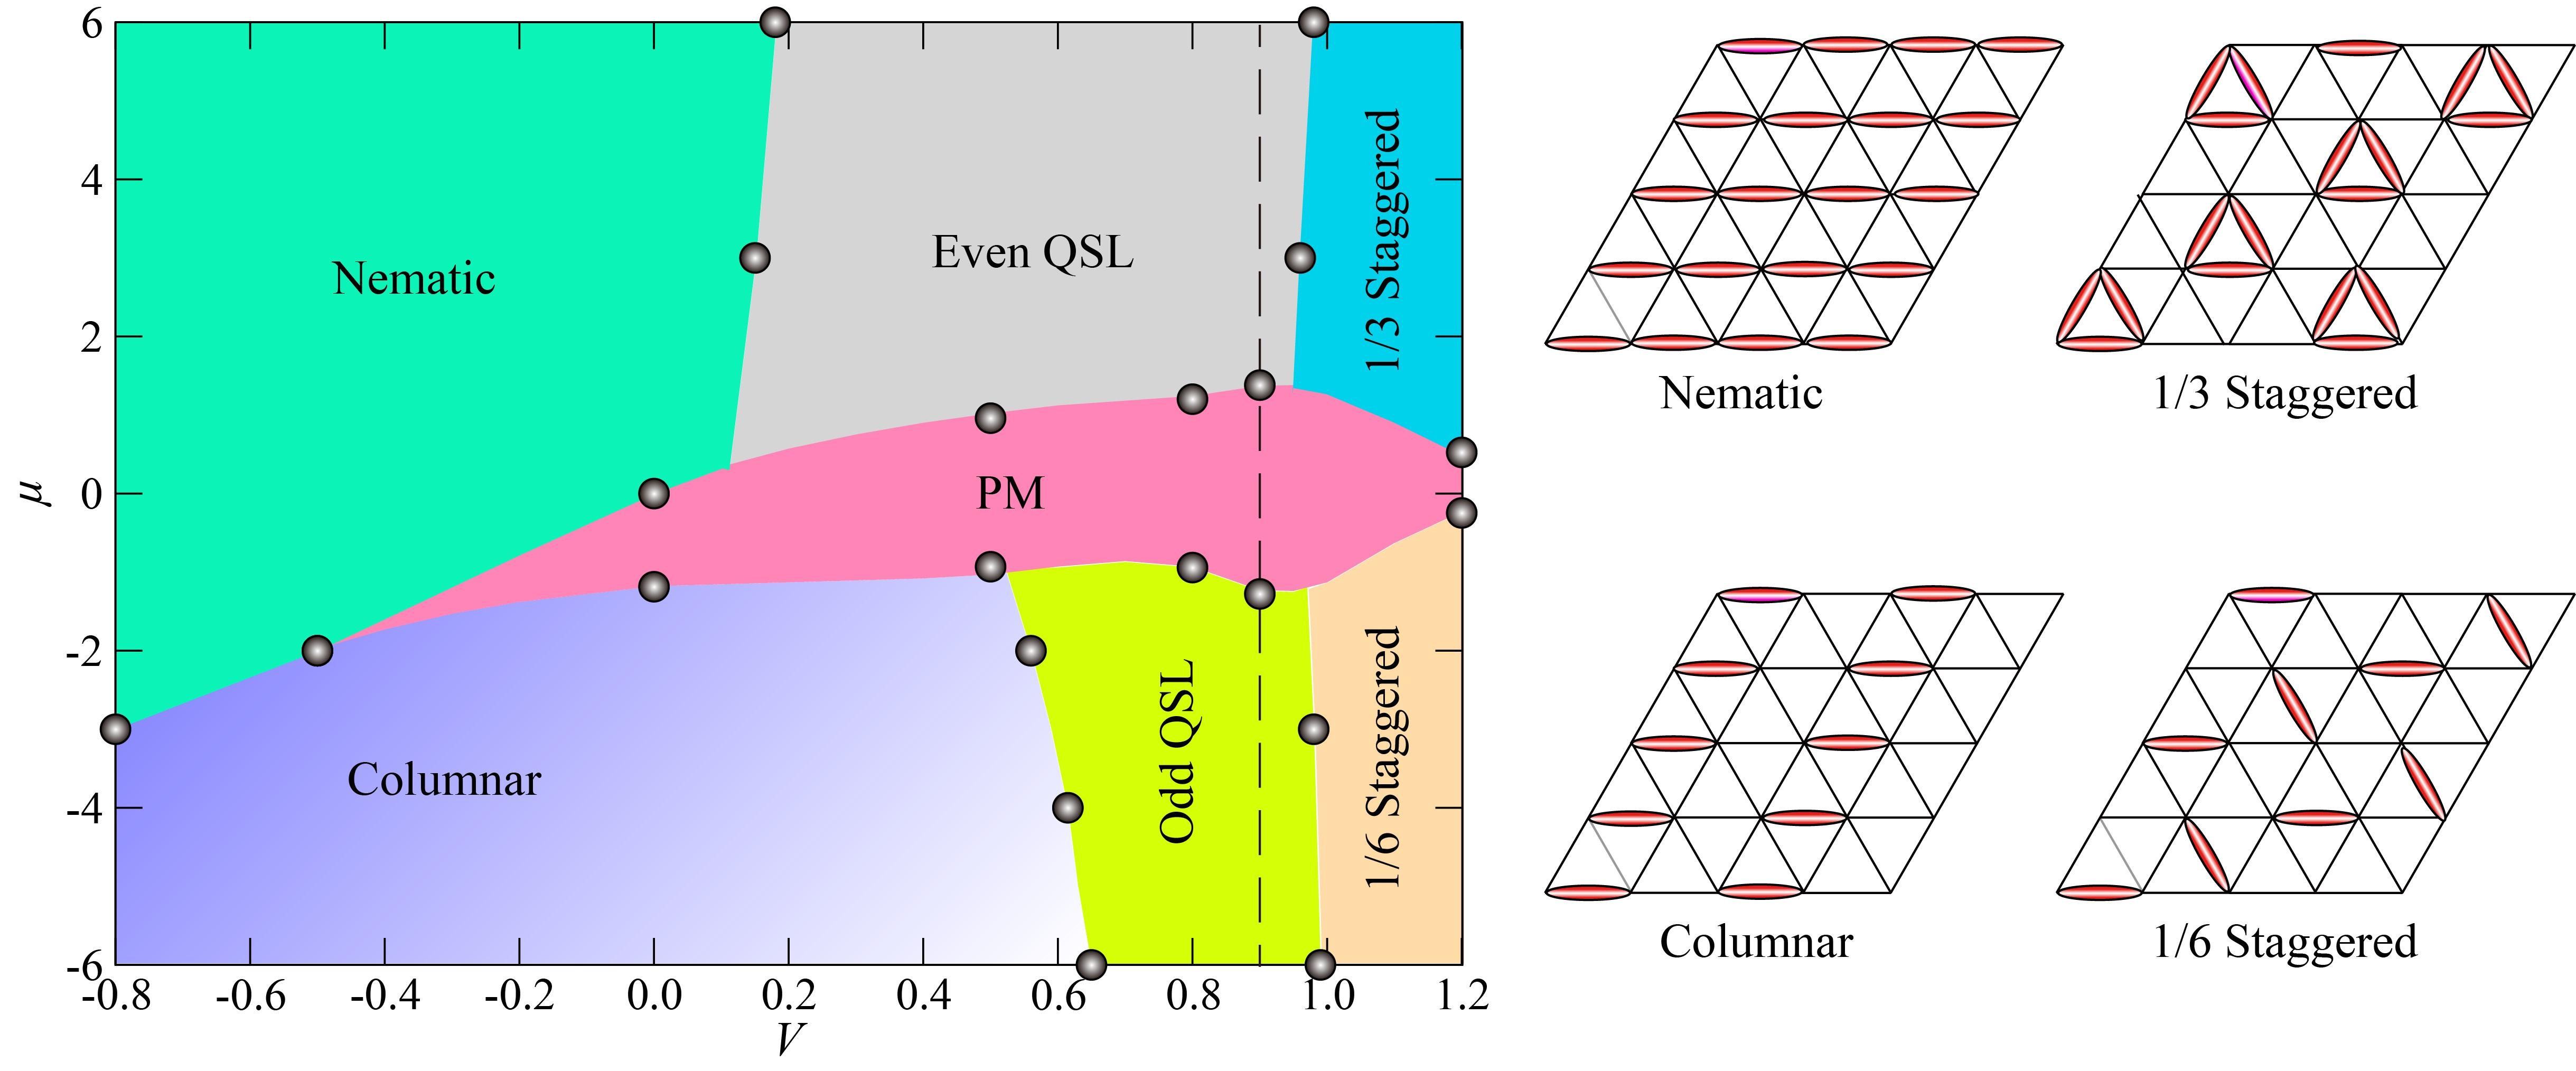 The obtained phase diagram in this work. Within different phases, the even Z2 quantum spin liquid (QSL) and odd Z2 QSL are topological ordered novel states of matter that are expected to exist in the Rydberg atom array experiments on Kagome lattices.